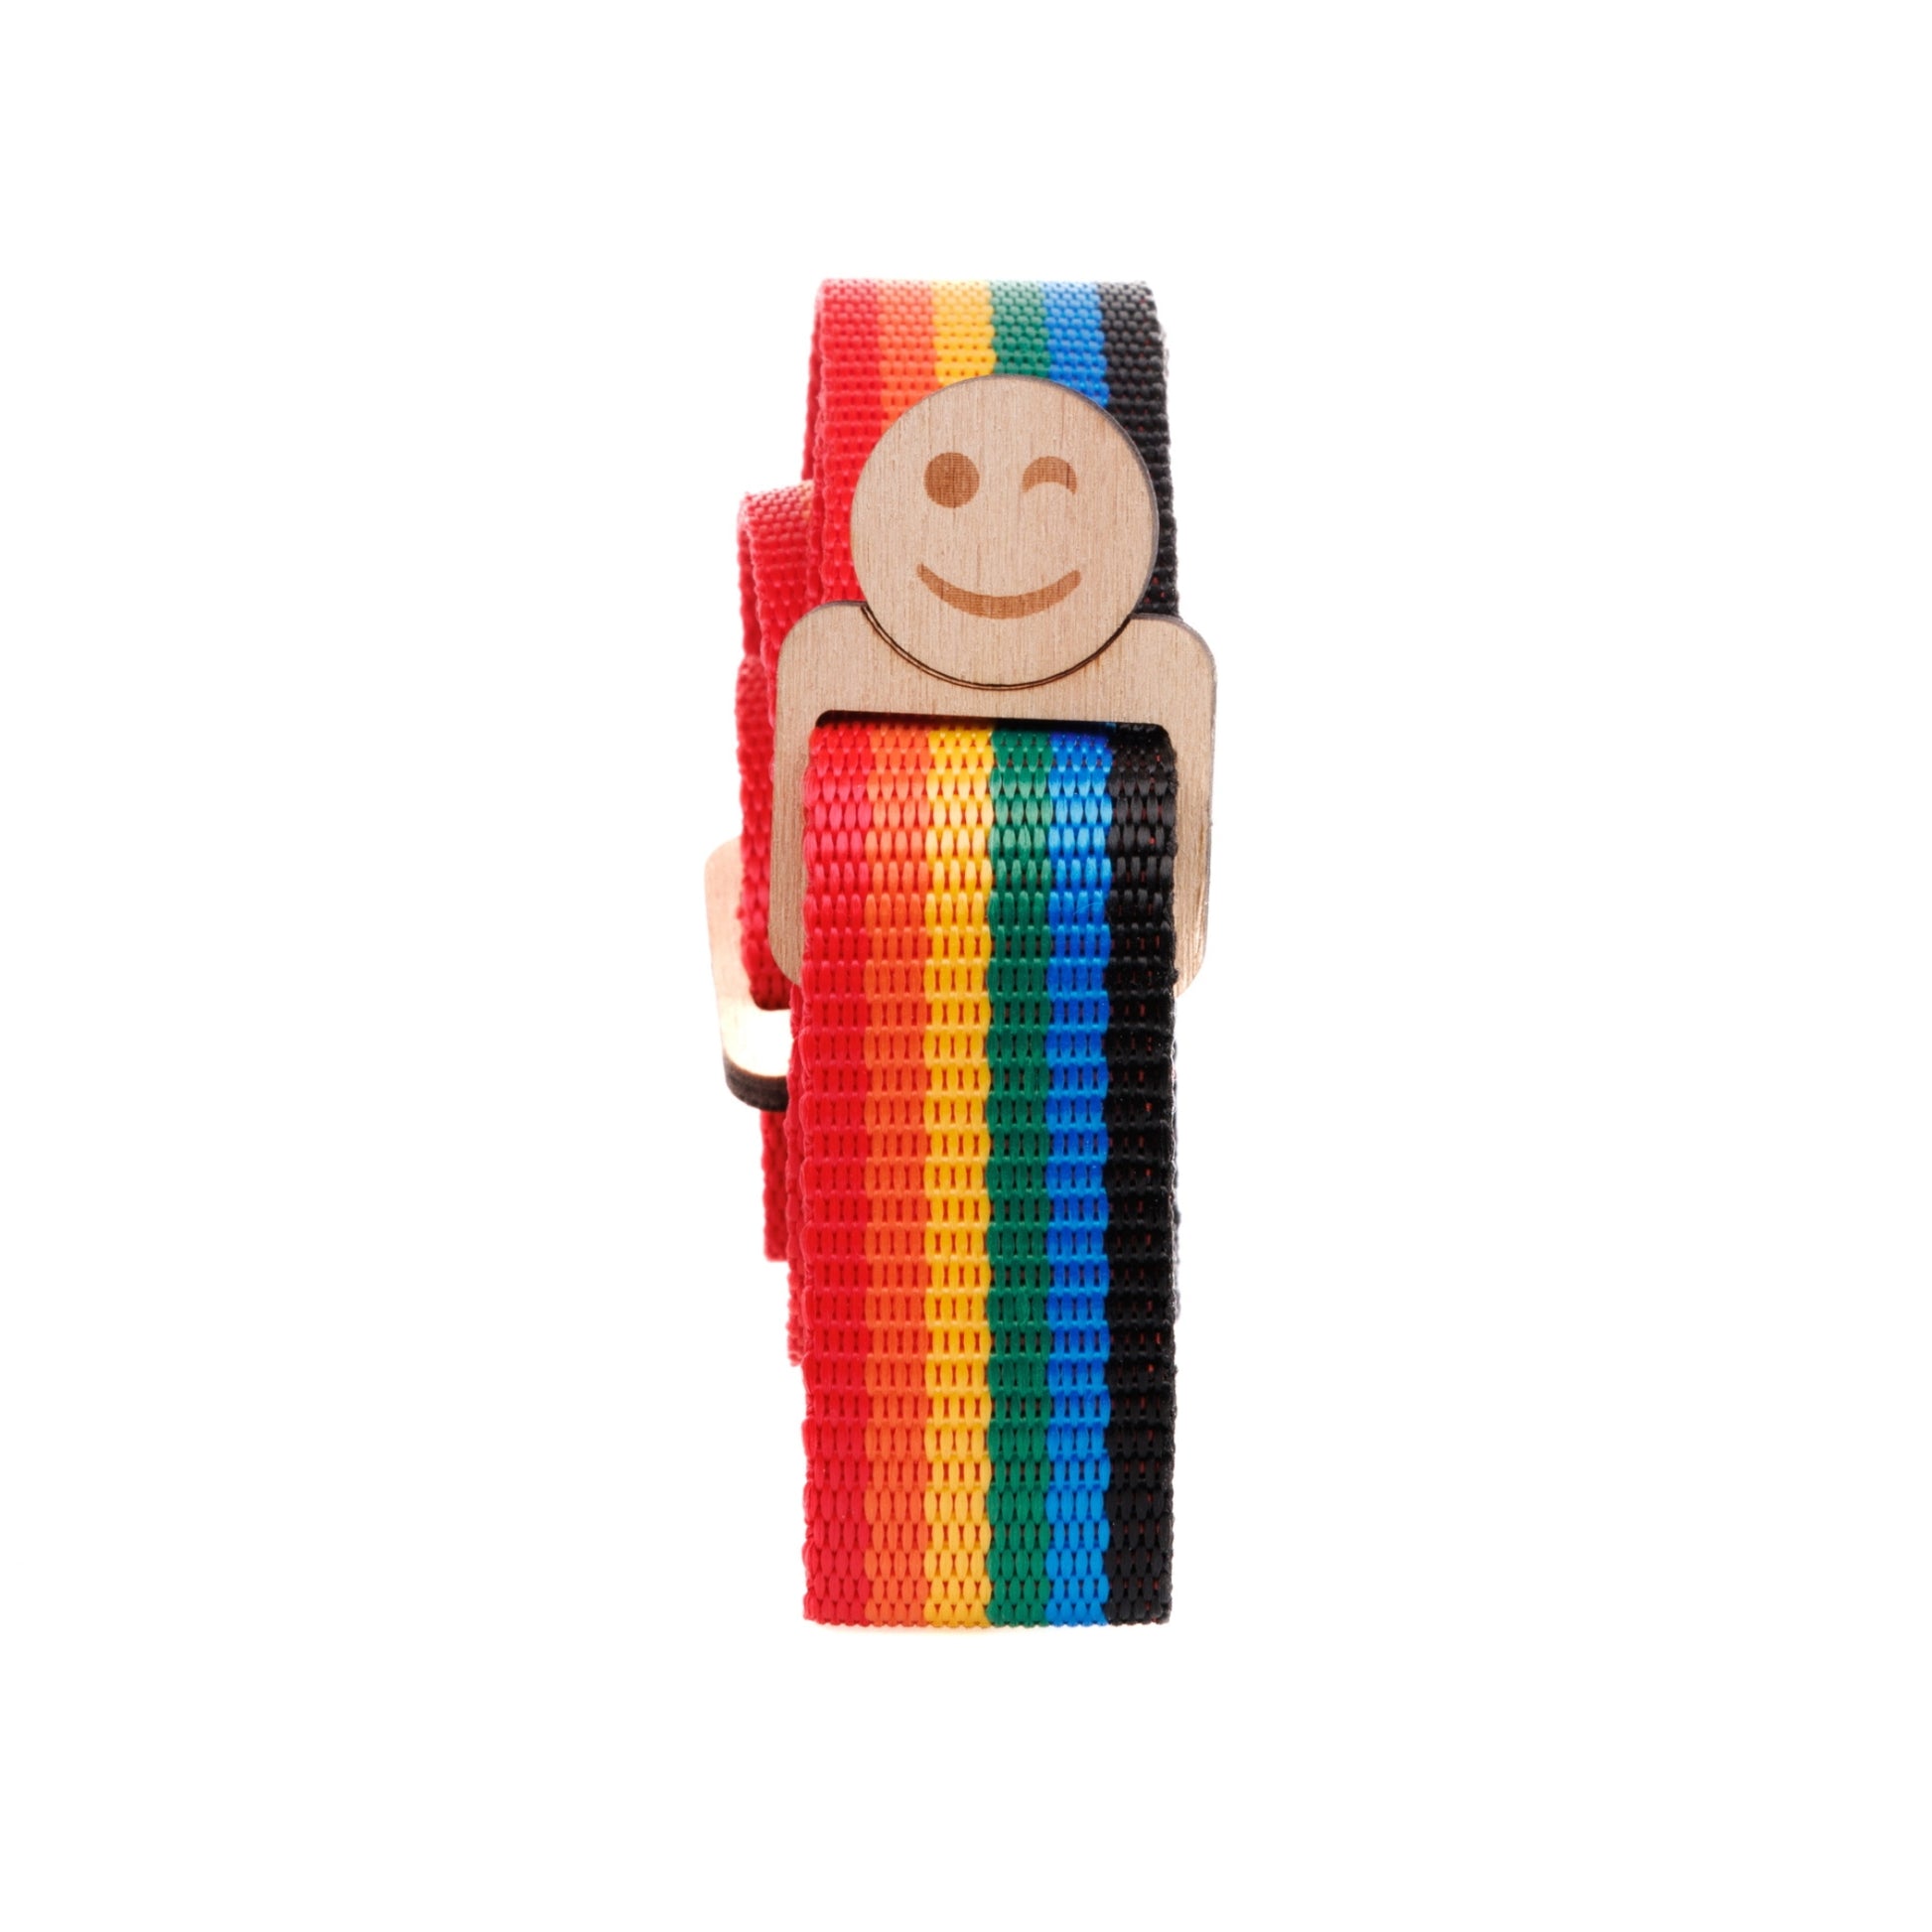 Packed Rainbow fabric neckstrap designed for Jollylook cameras, featuring a sturdy natural wood lock for securely carrying the camera.